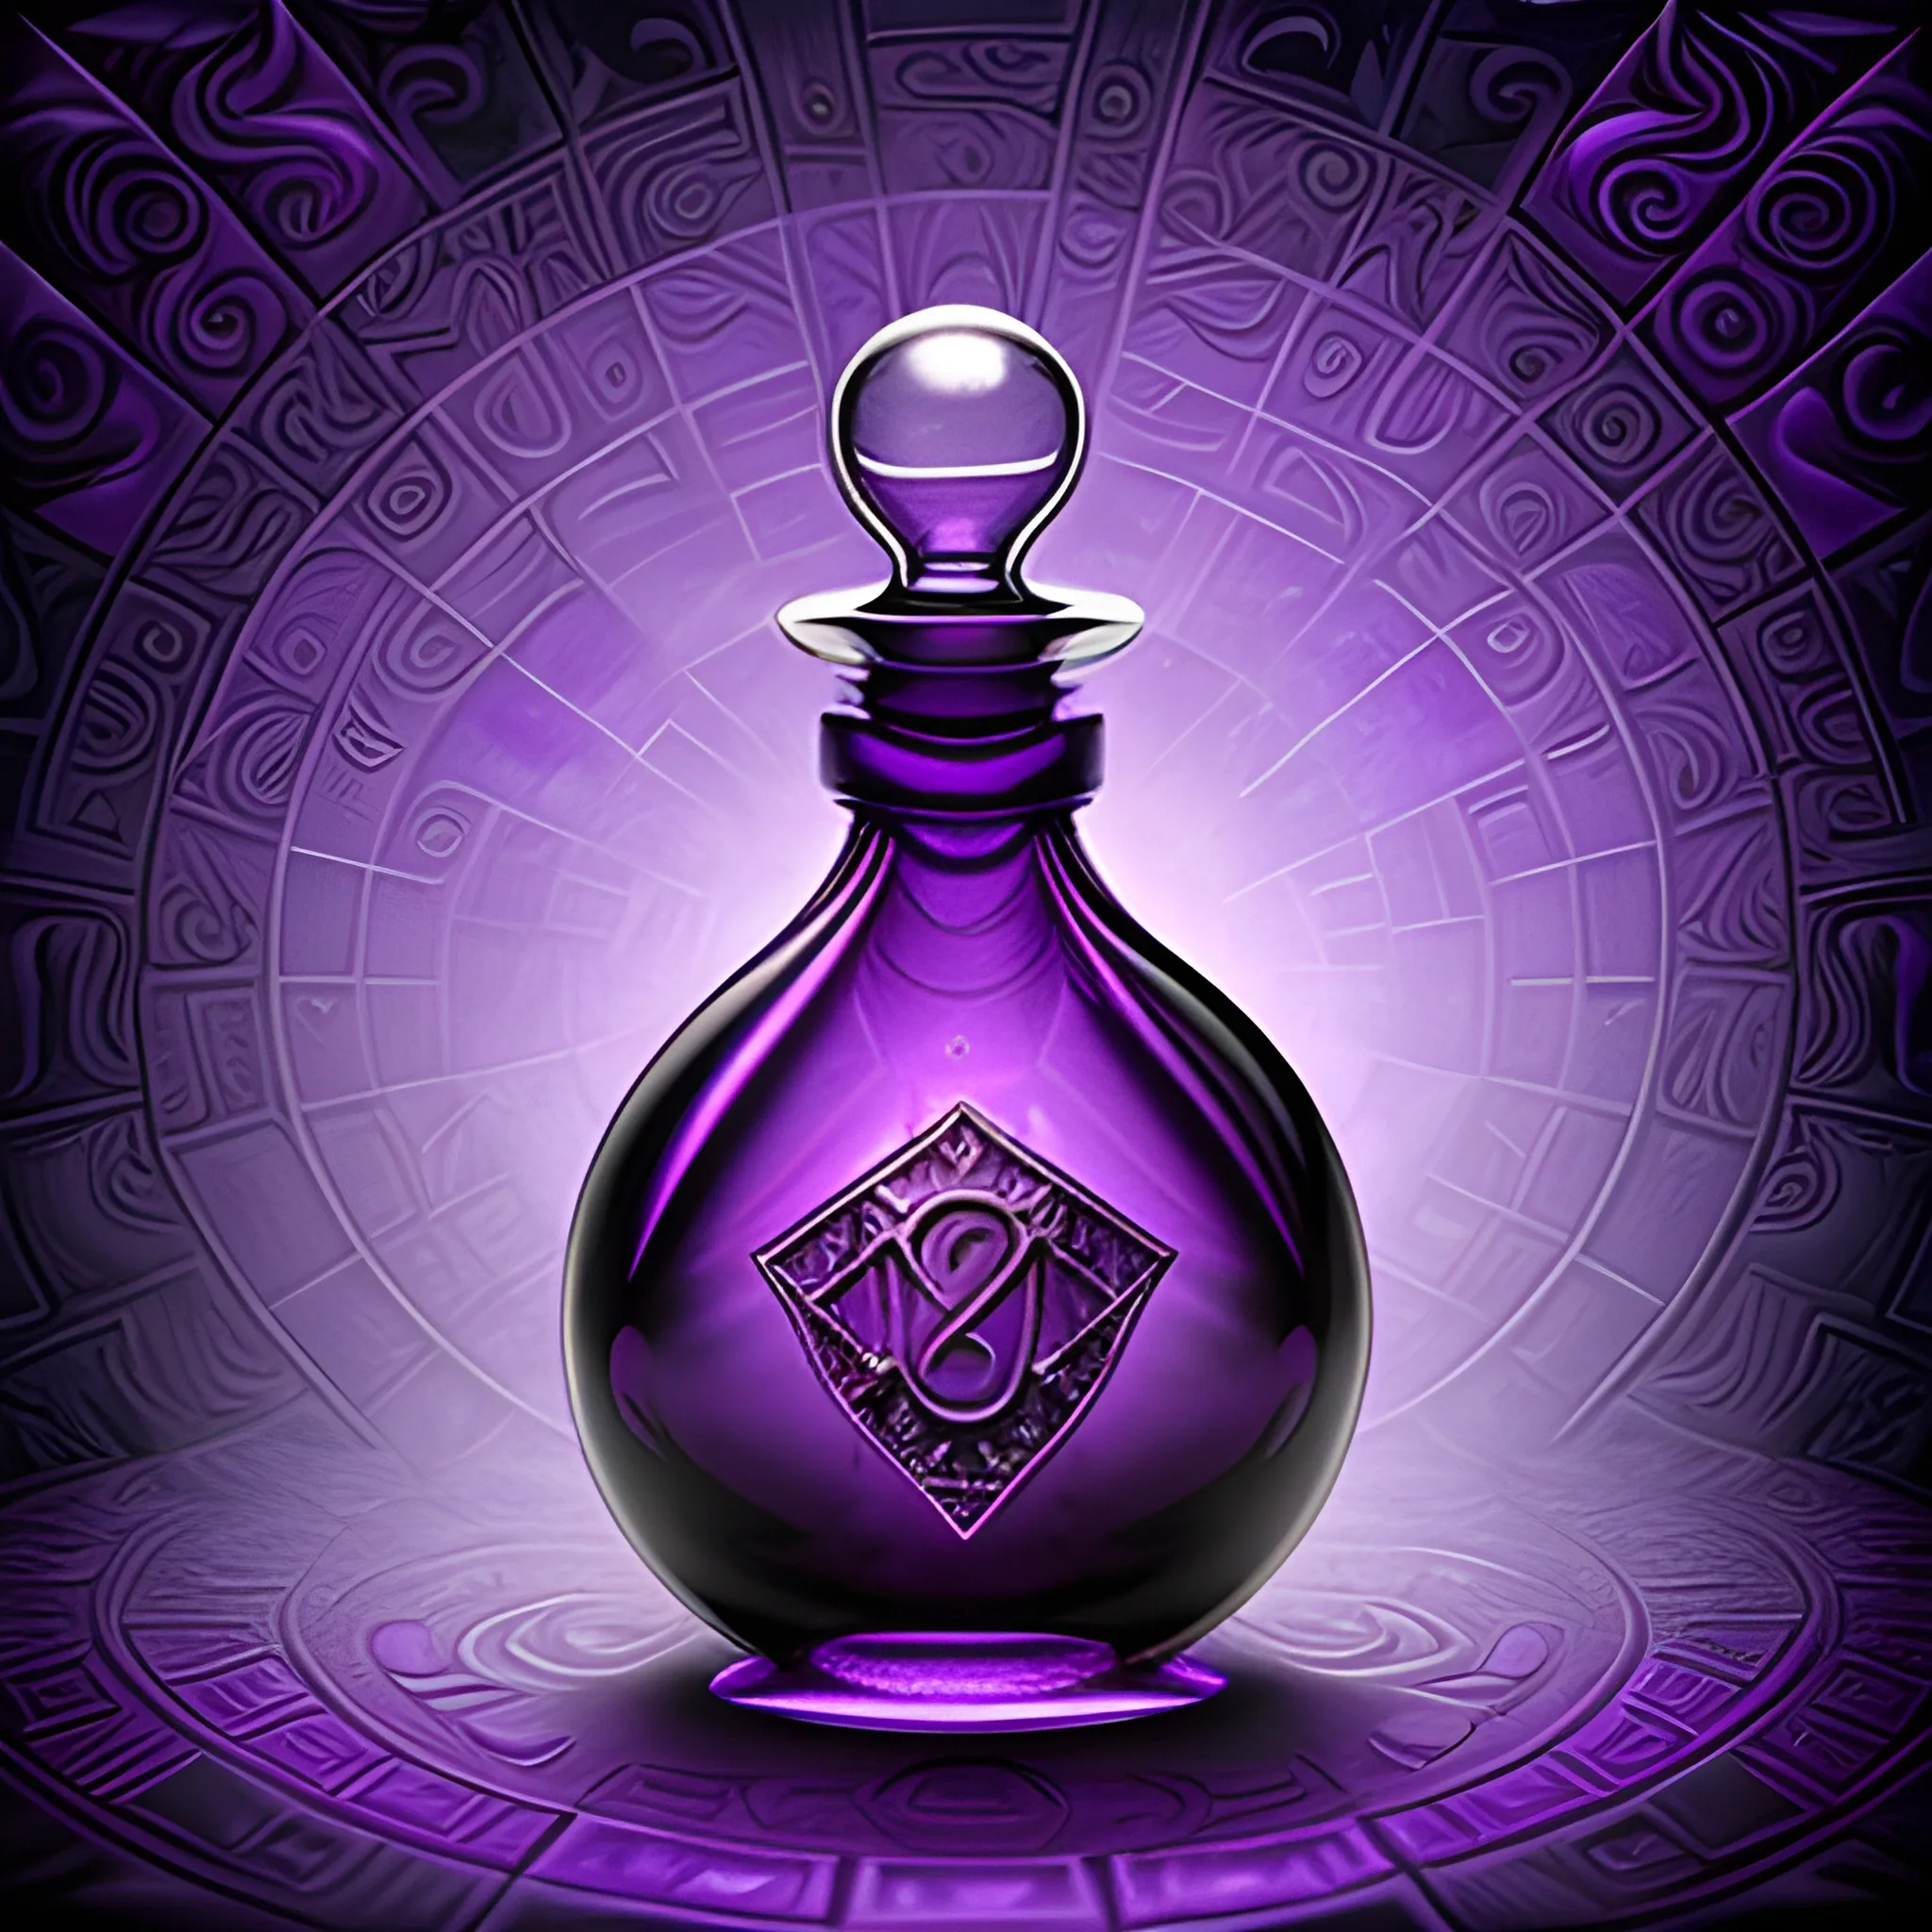 Potion bottle magic mysterious purple DnD mystery MORE MYSTERIOUS purple swirl background crazy backgound mystery
, Trippy